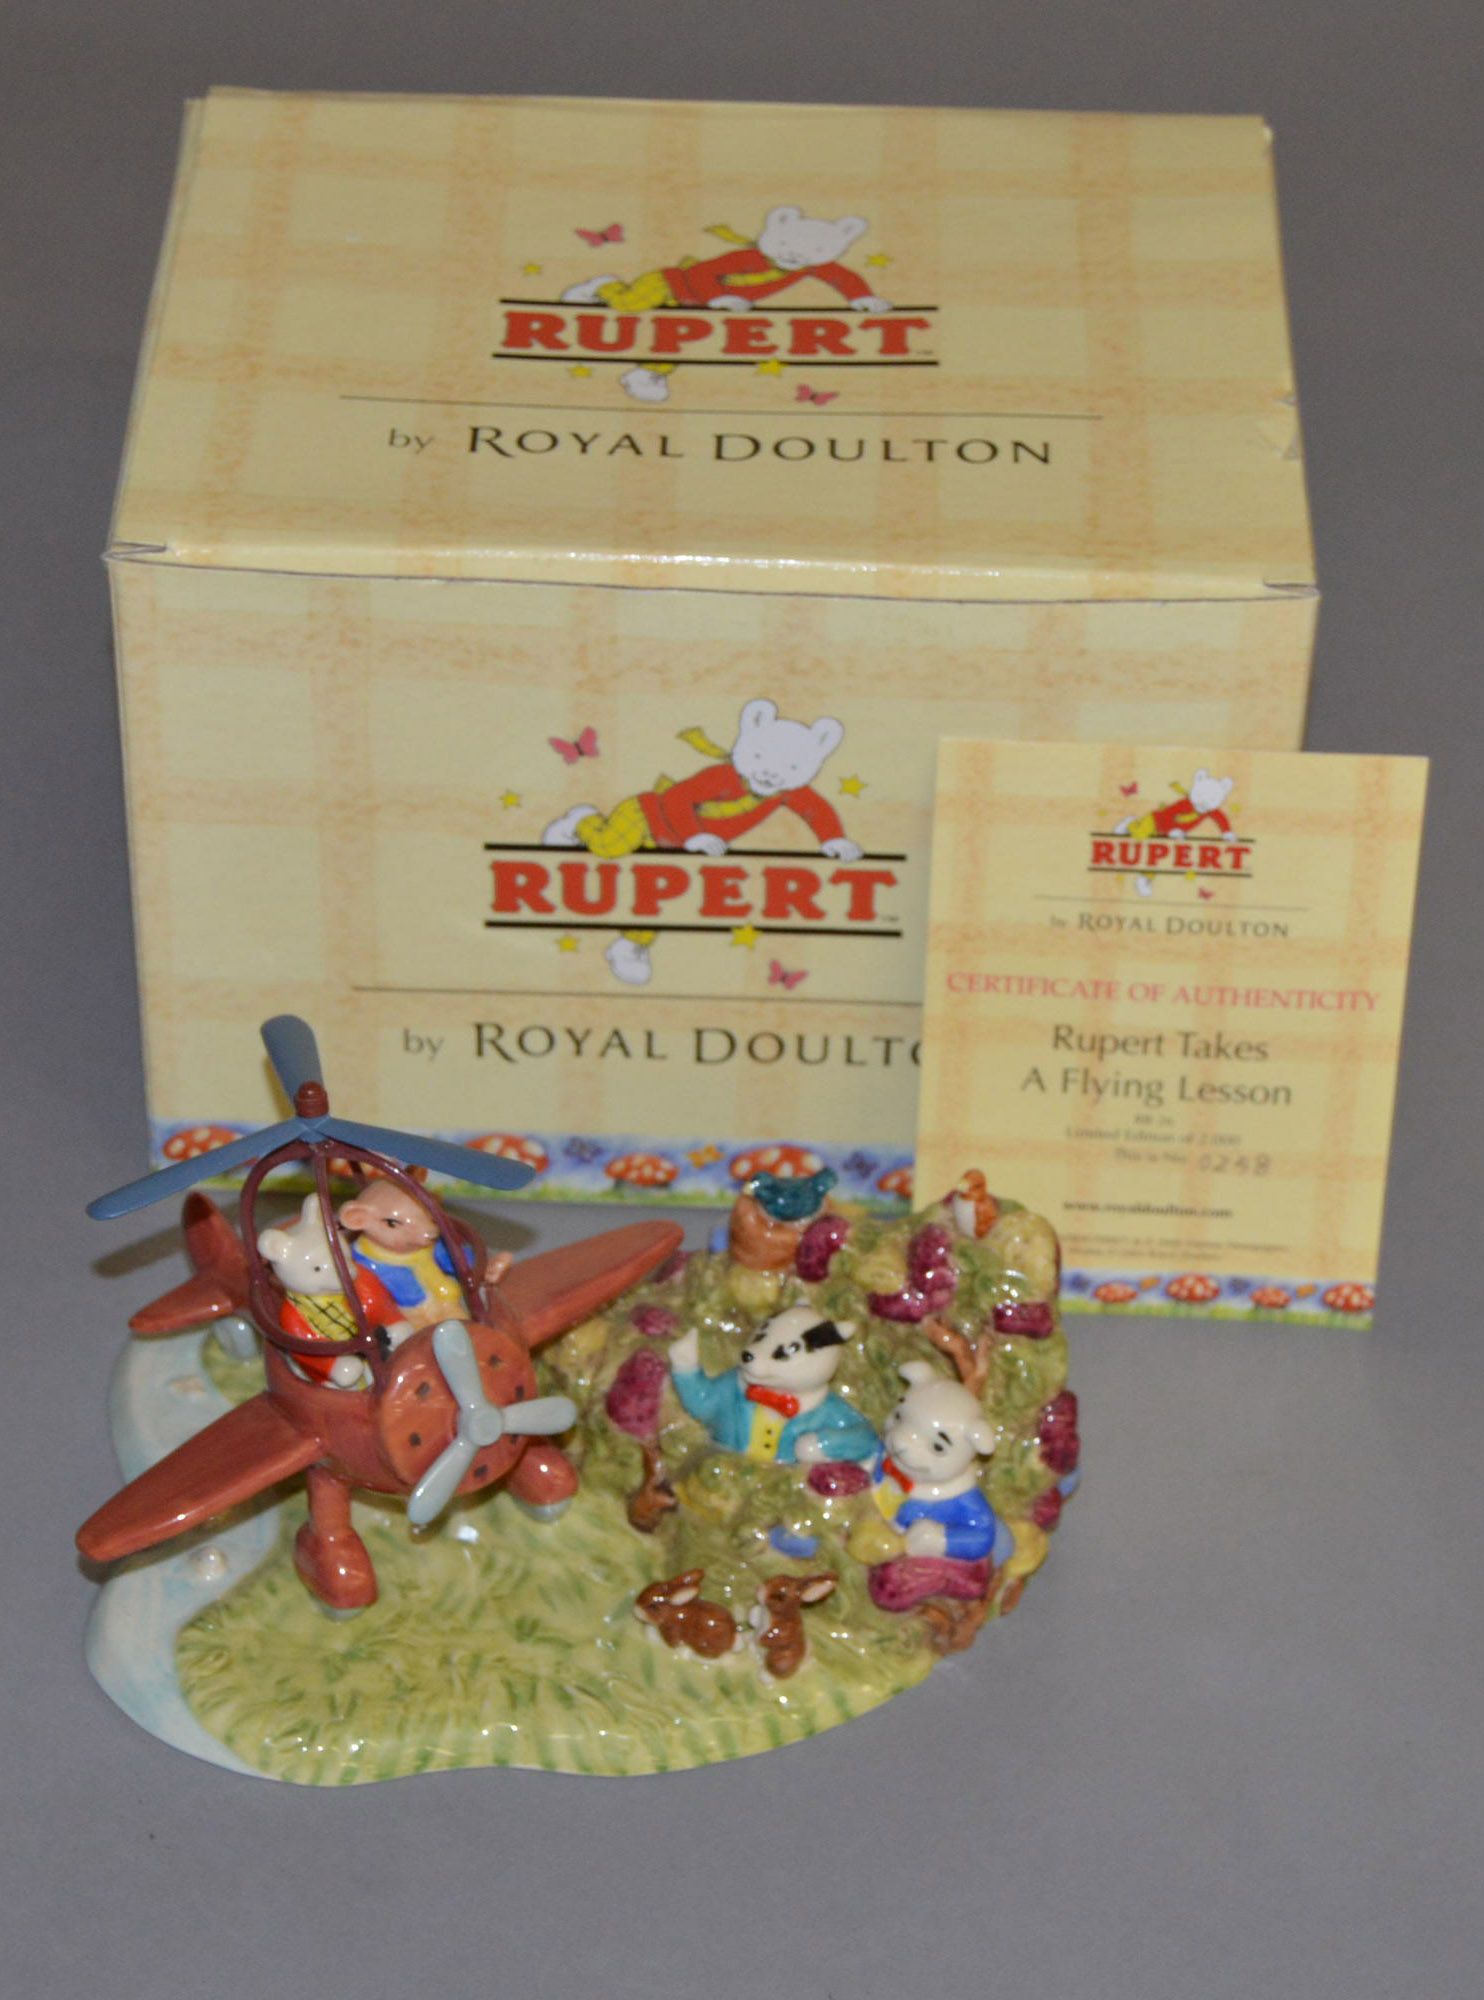 Royal Doulton Rupert limited edition figure group: Rupert Takes A Flying Lesson RB 26 258/550 (200